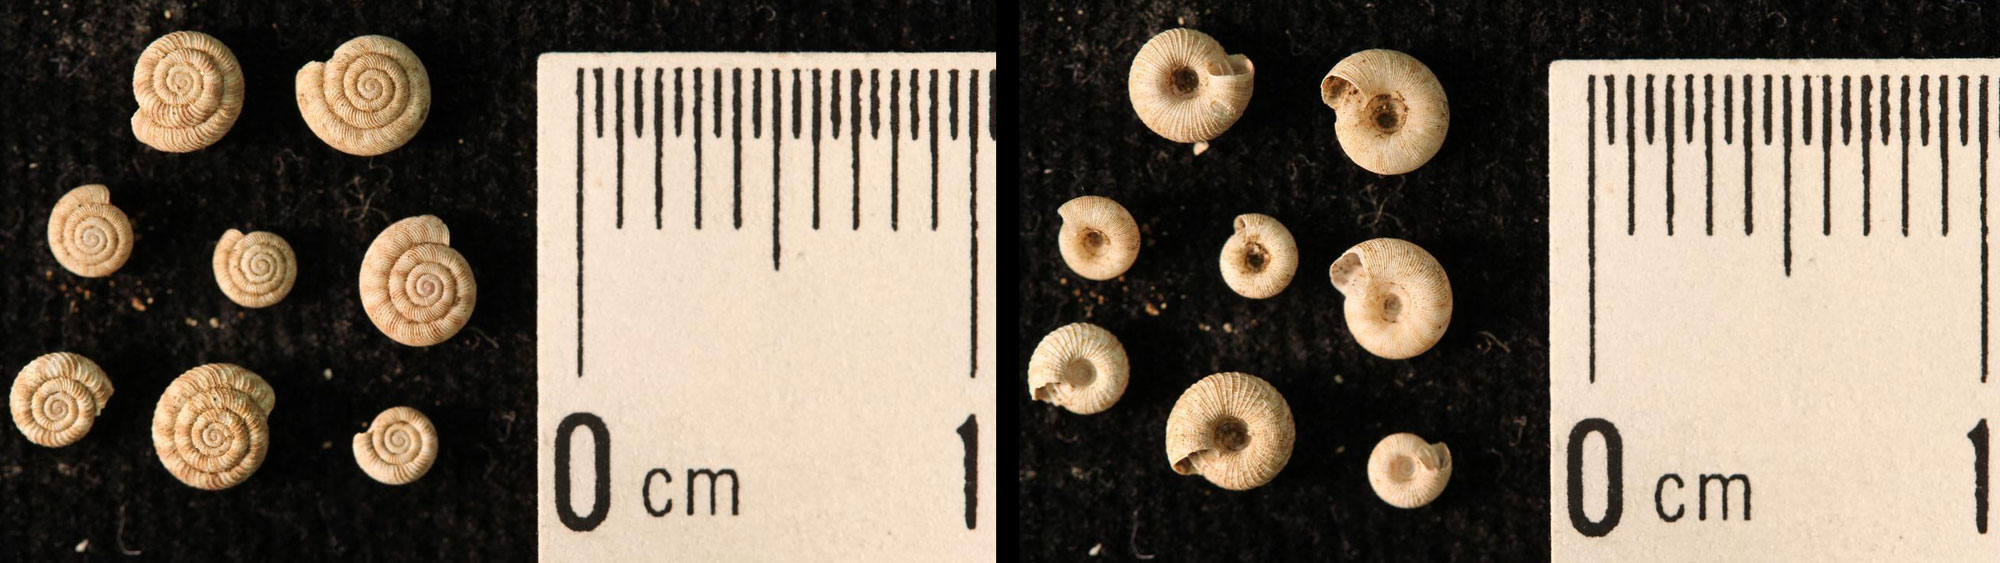 2-panel image showing view of both sides of eight land snail shells in the genus Endodonta from the Pleistocene of Oahu. The shells are very small (less than one half centimeter), coil in more or less a single plane, and are off-white in color with faint stripes on one side.